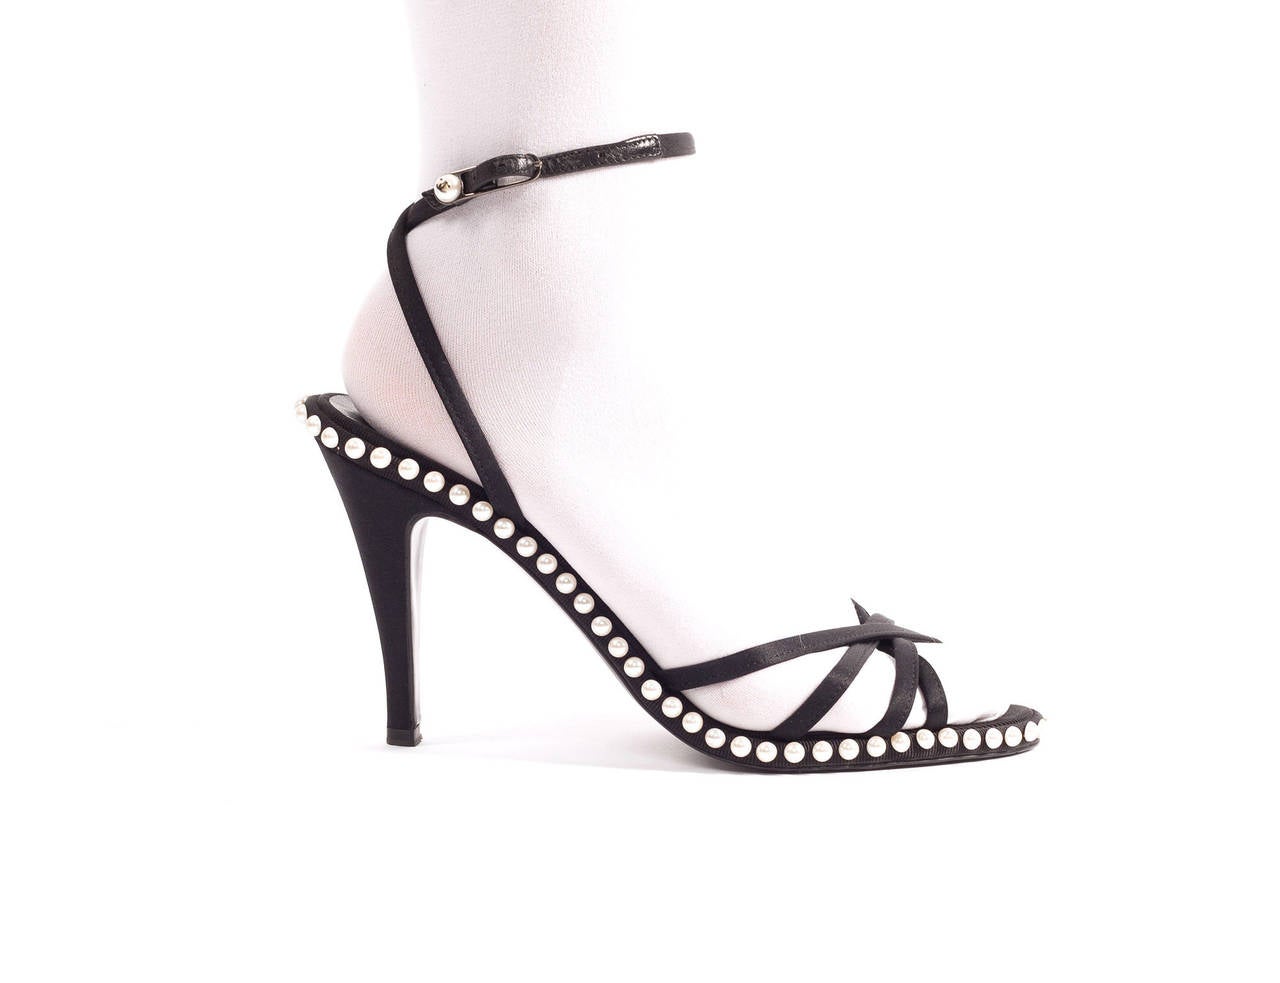 Chanel black satin Sandals with Pearl detail, Sz. 8.5 1